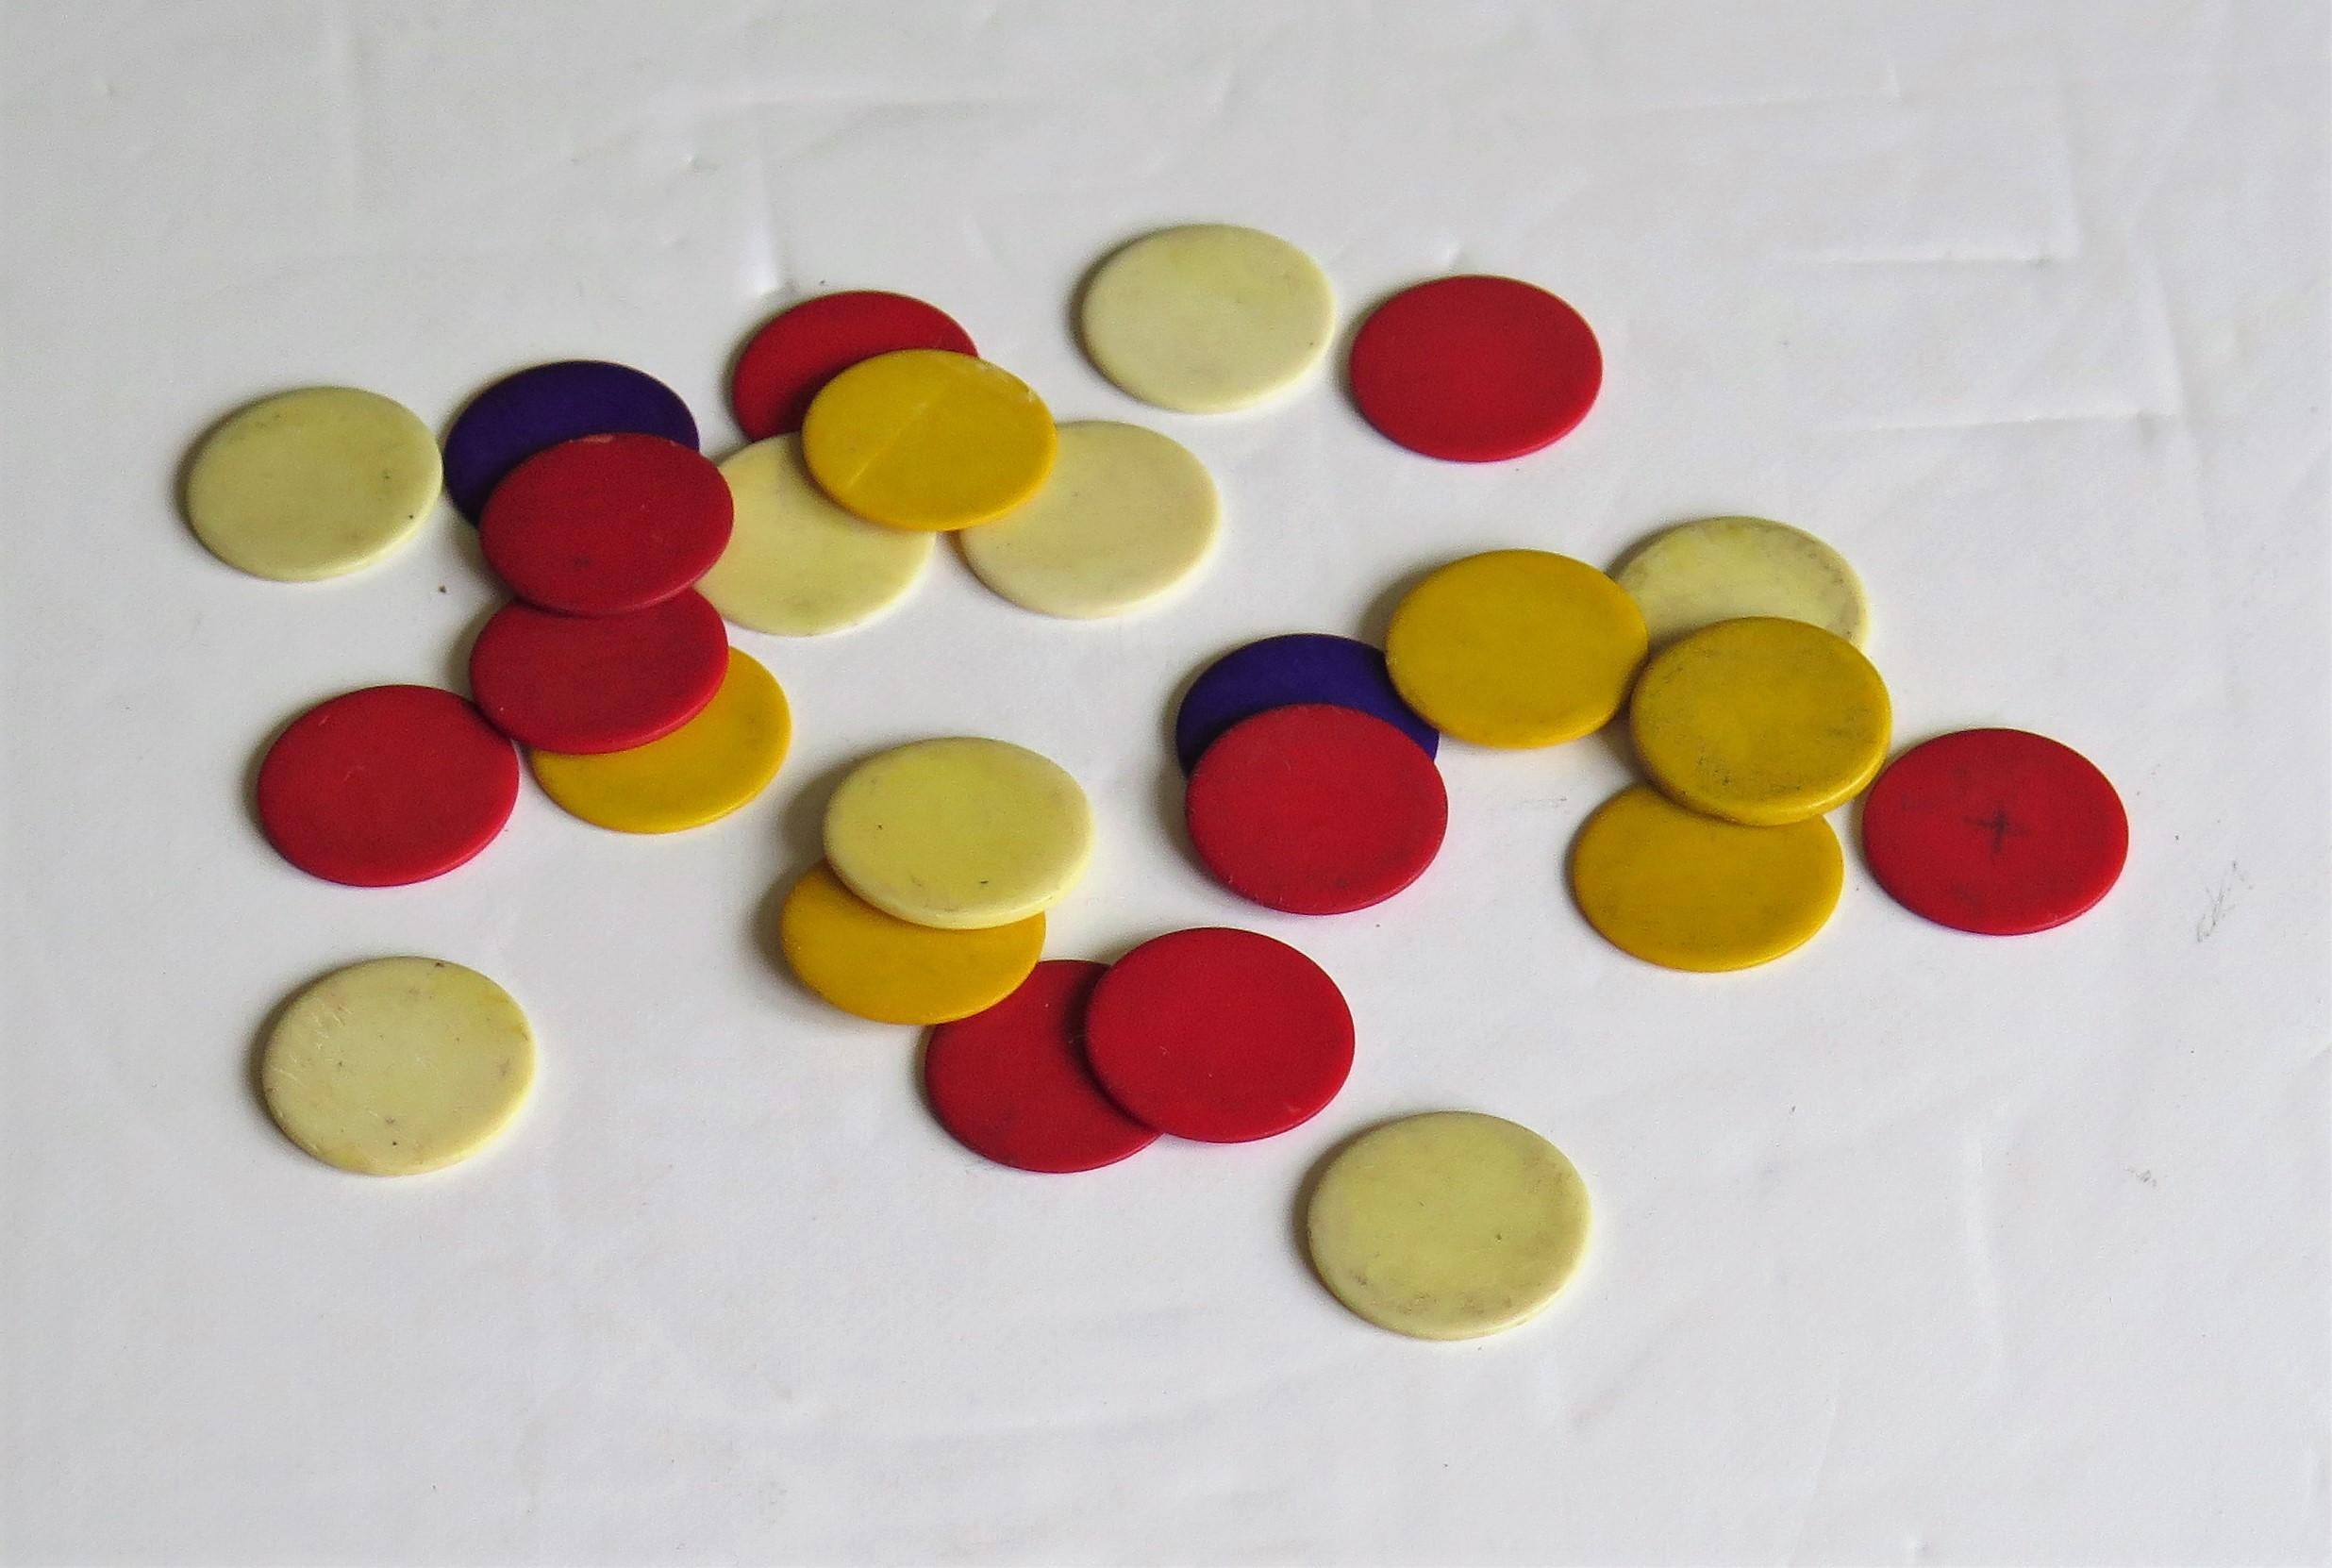 Glass Combination Board Game of Marble Solitaire and Tiddlywinks, circa 1925 For Sale